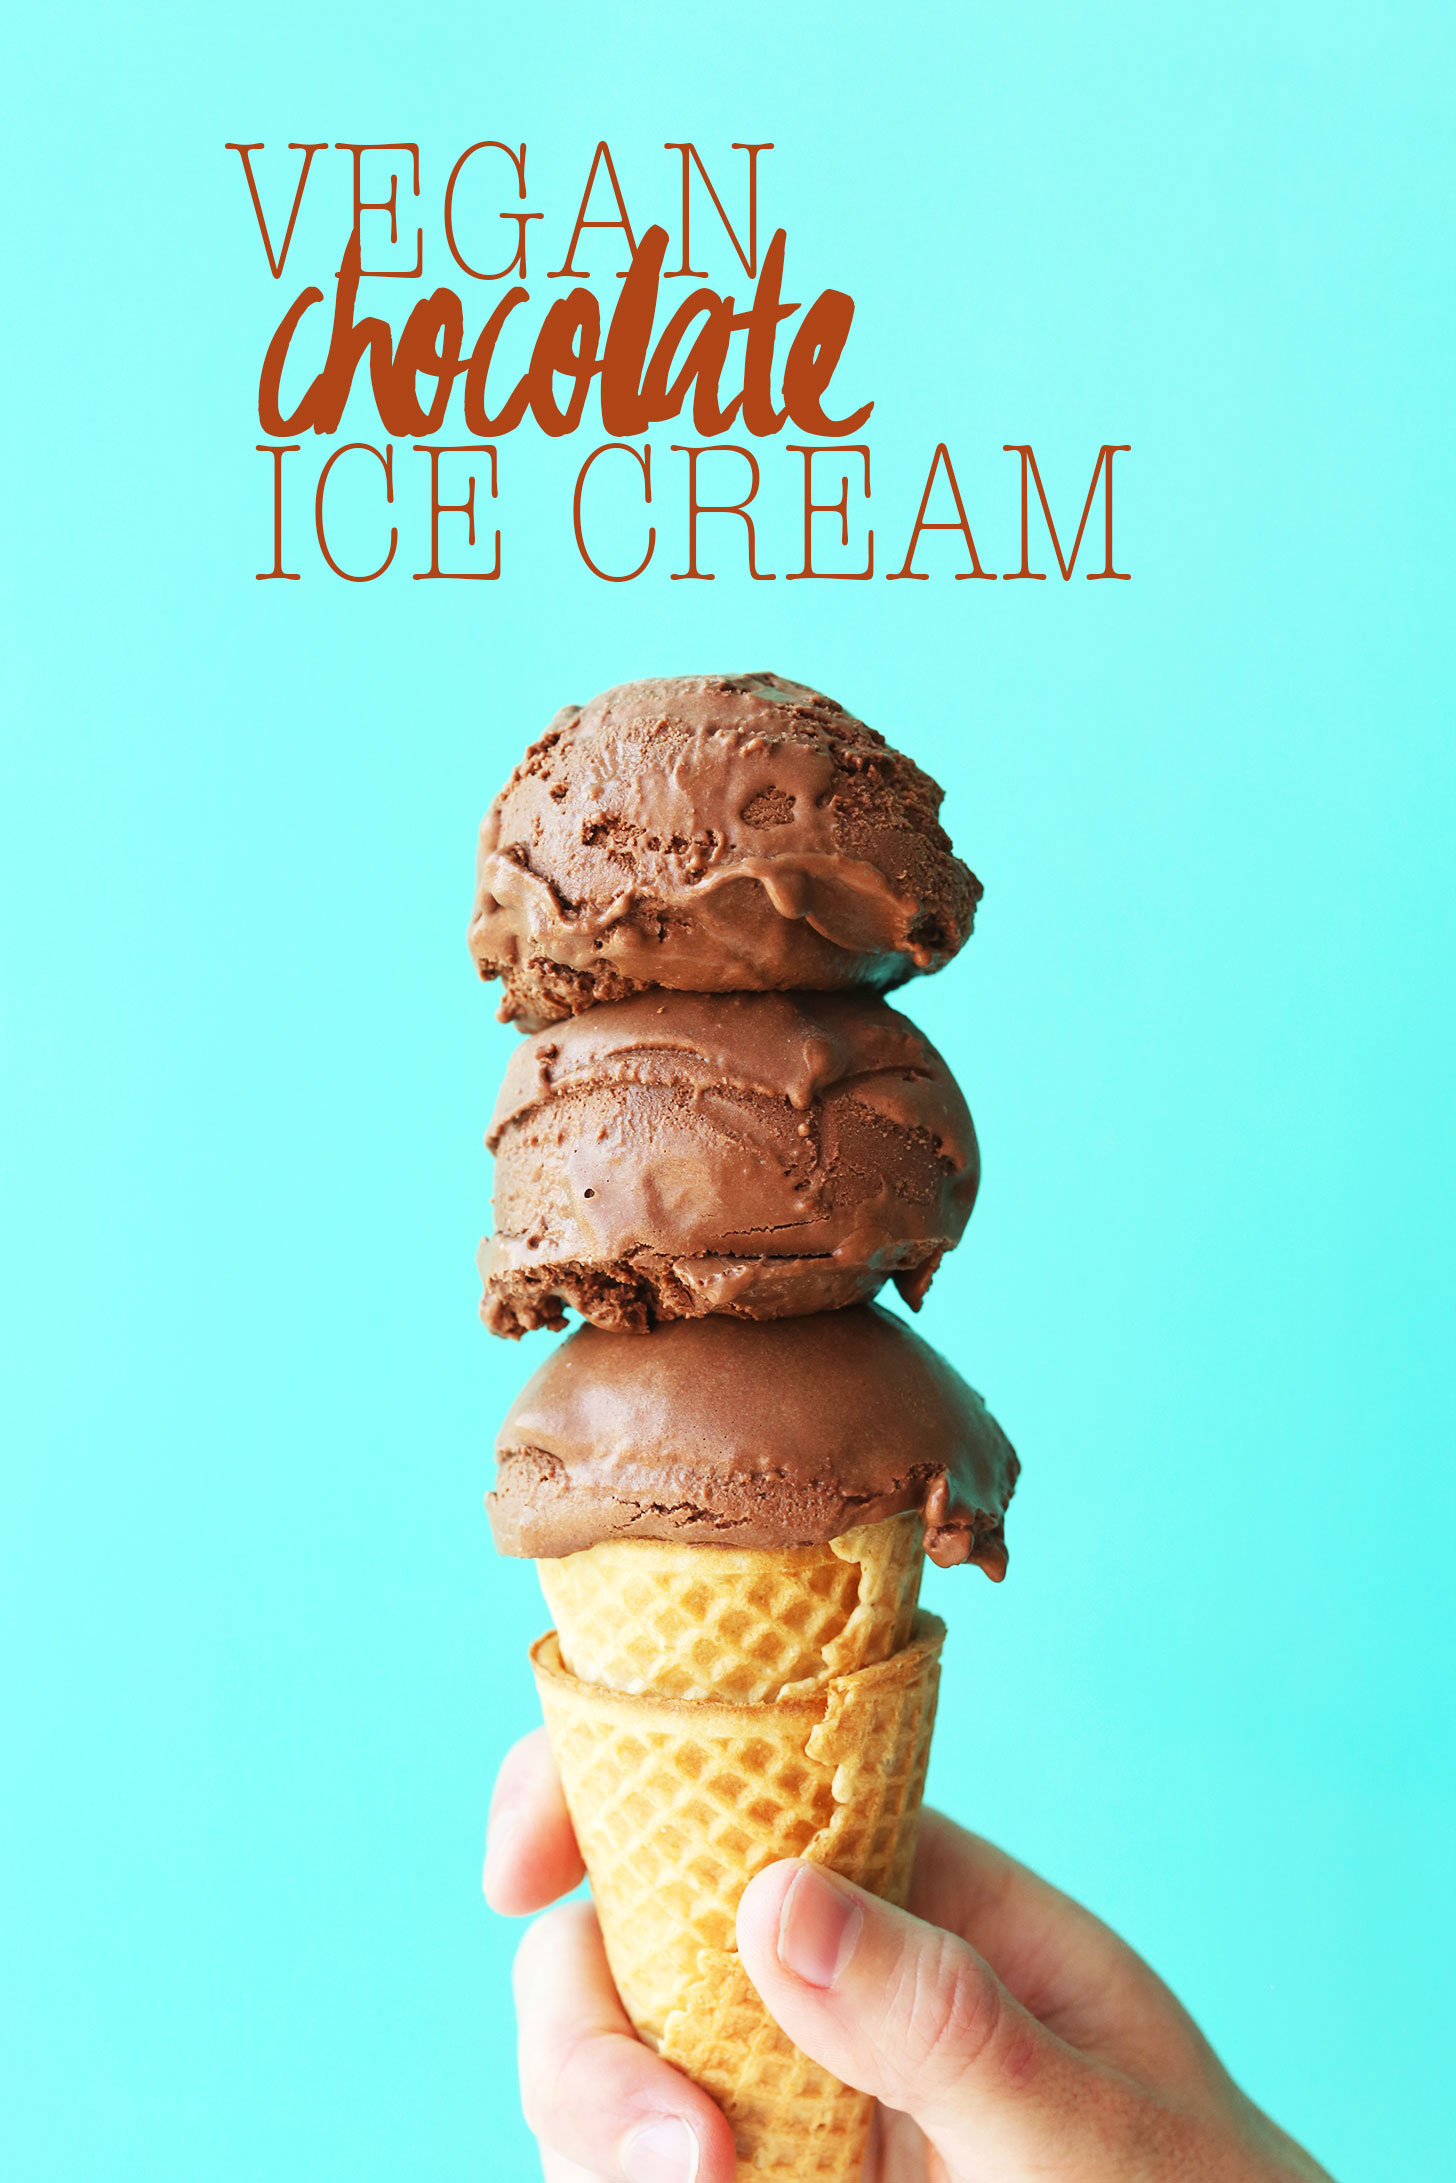 Sugar cone with scoops of homemade rich and creamy vegan chocolate ice cream